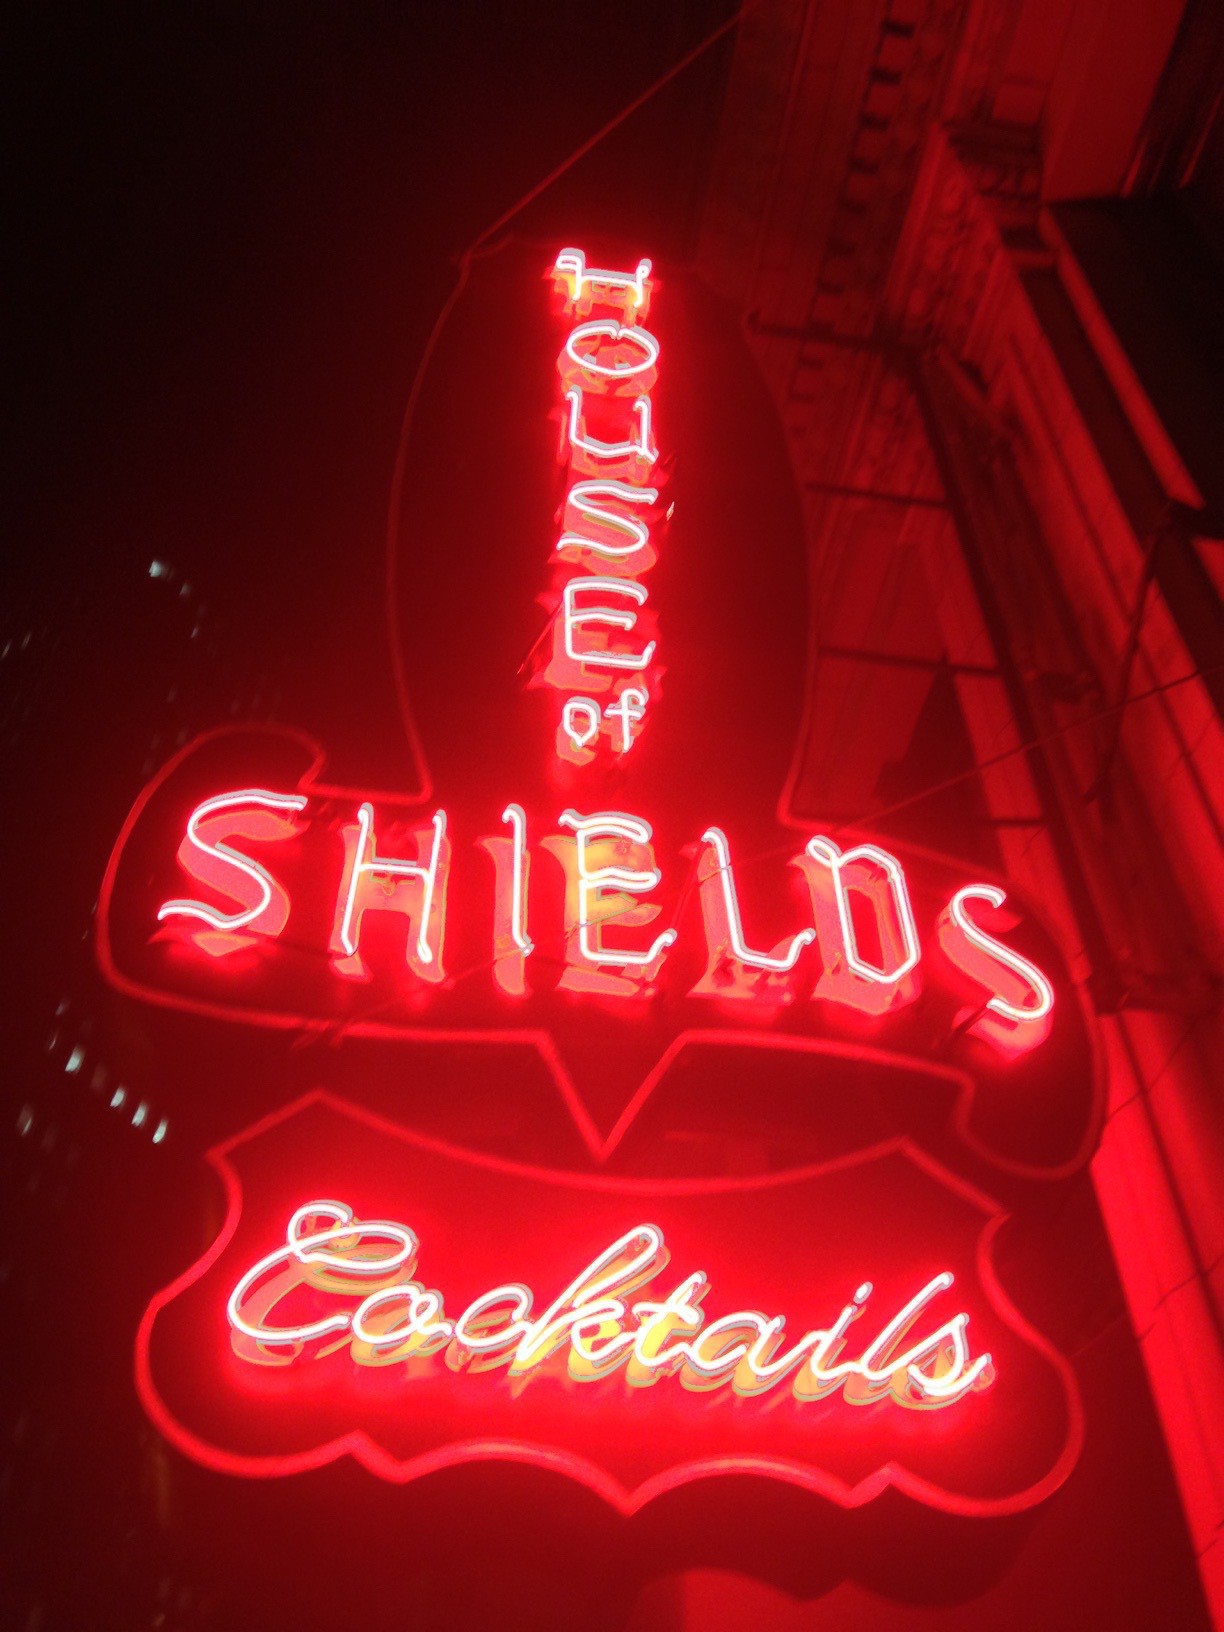 The neon sign out front of the House of Shields